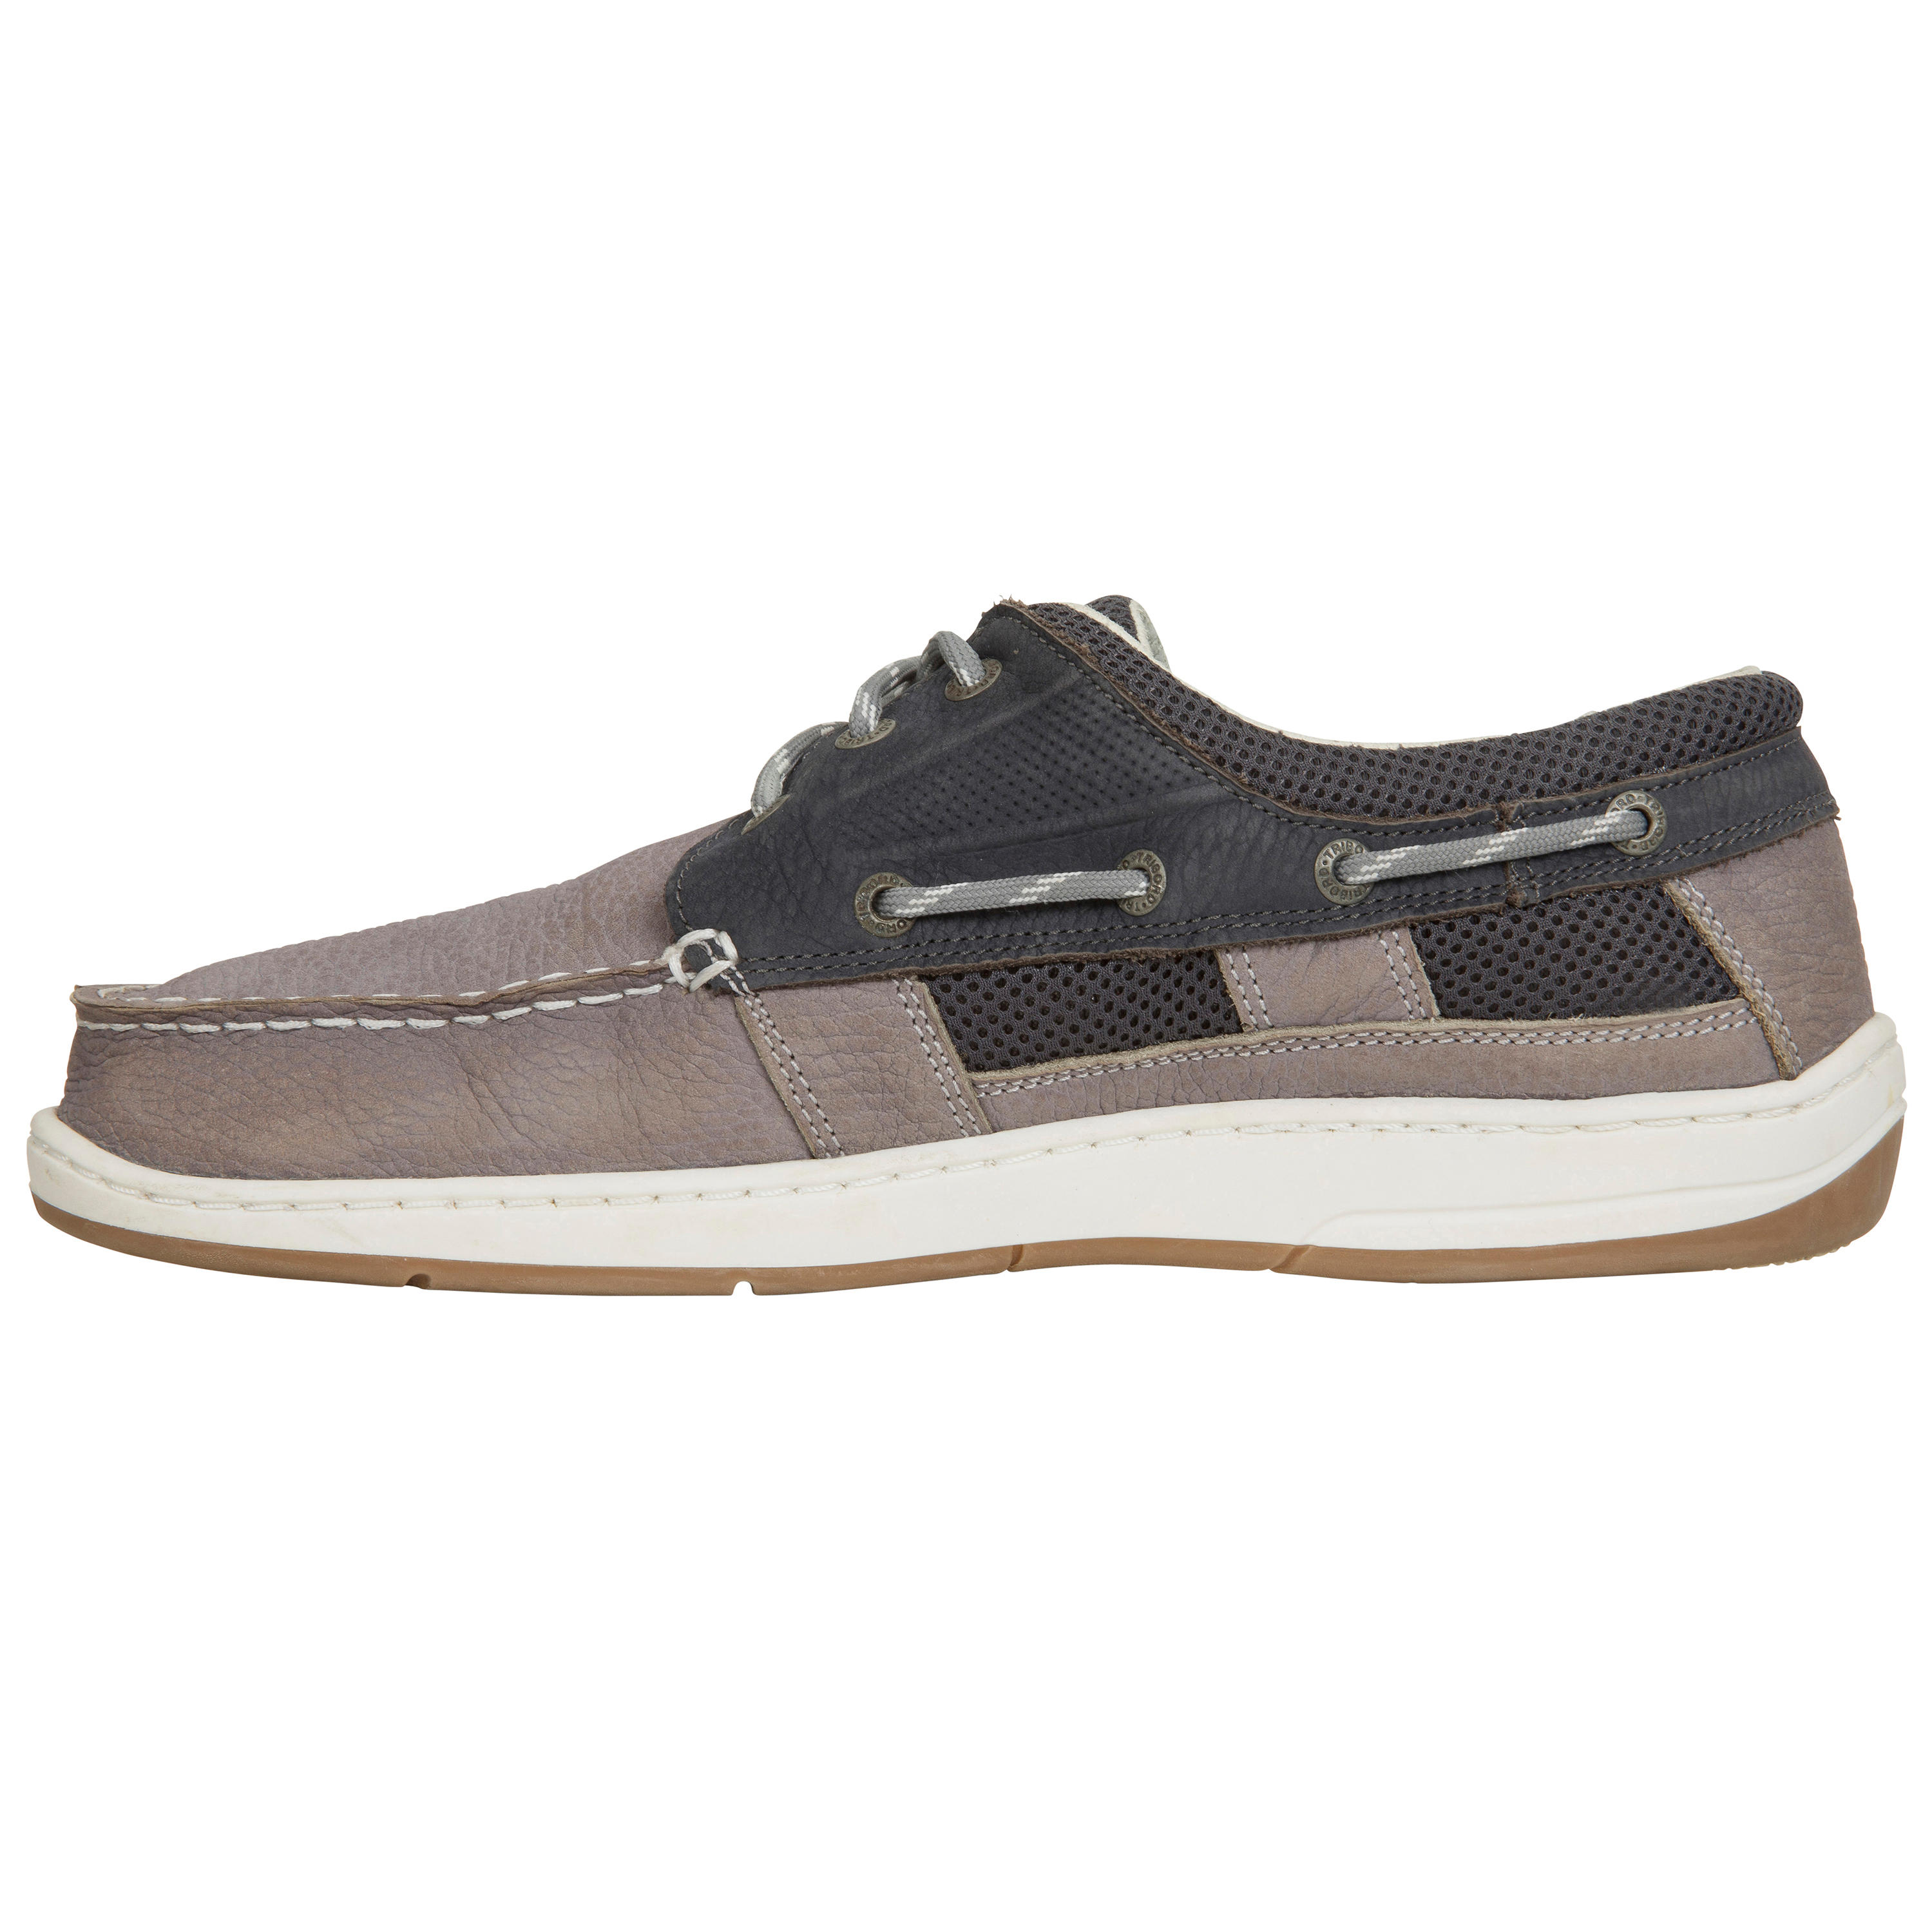 Men's Leather Boat Shoes CLIPPER - Grey 1/9